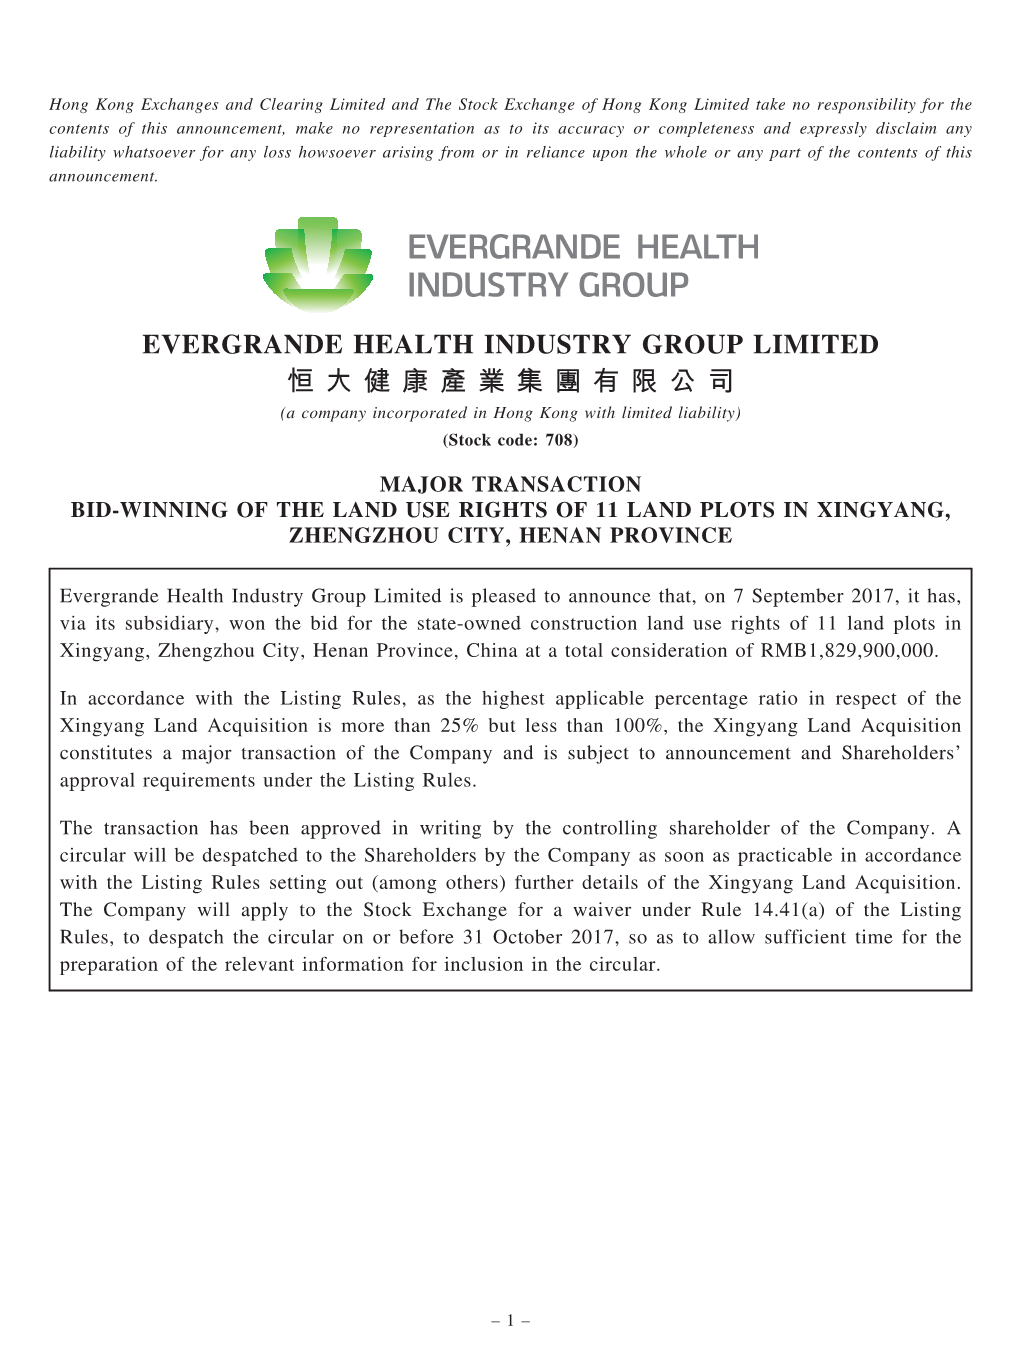 EVERGRANDE HEALTH INDUSTRY GROUP LIMITED 恒 大 健 康 產 業 集 團 有 限 公 司 (A Company Incorporated in Hong Kong with Limited Liability) (Stock Code: 708)